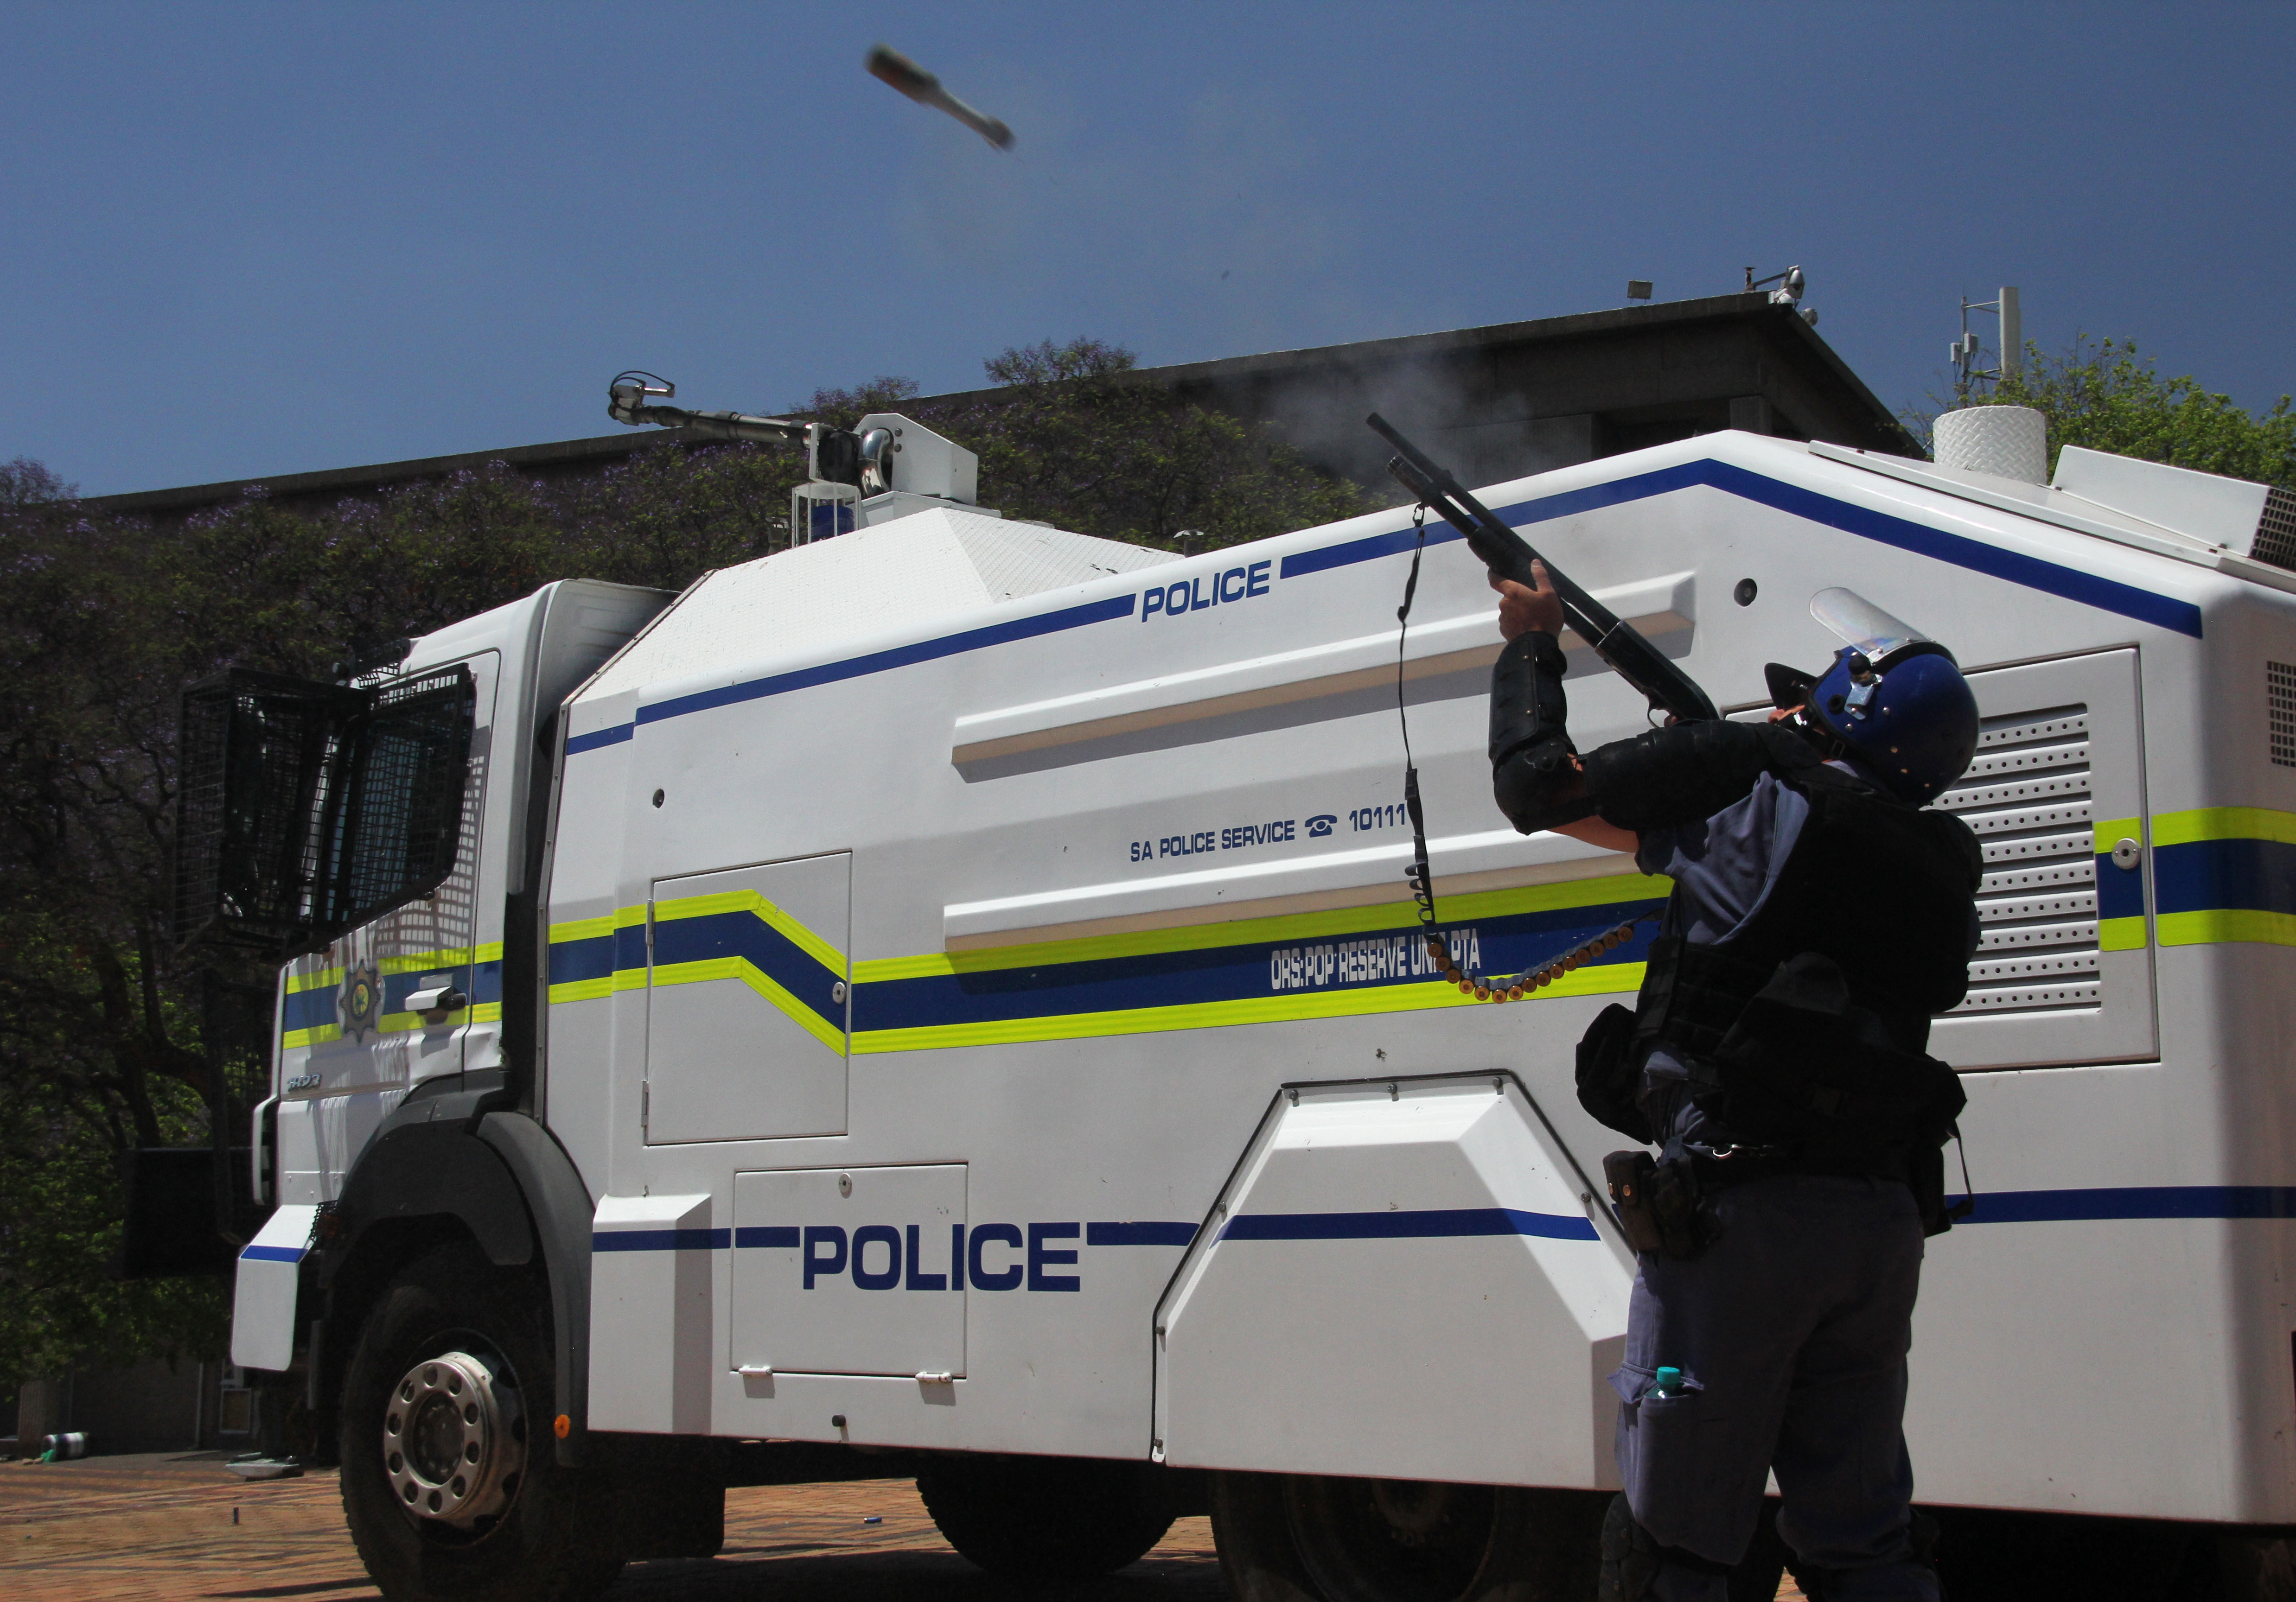 wits feesmustfall protest 10 october 2016 police